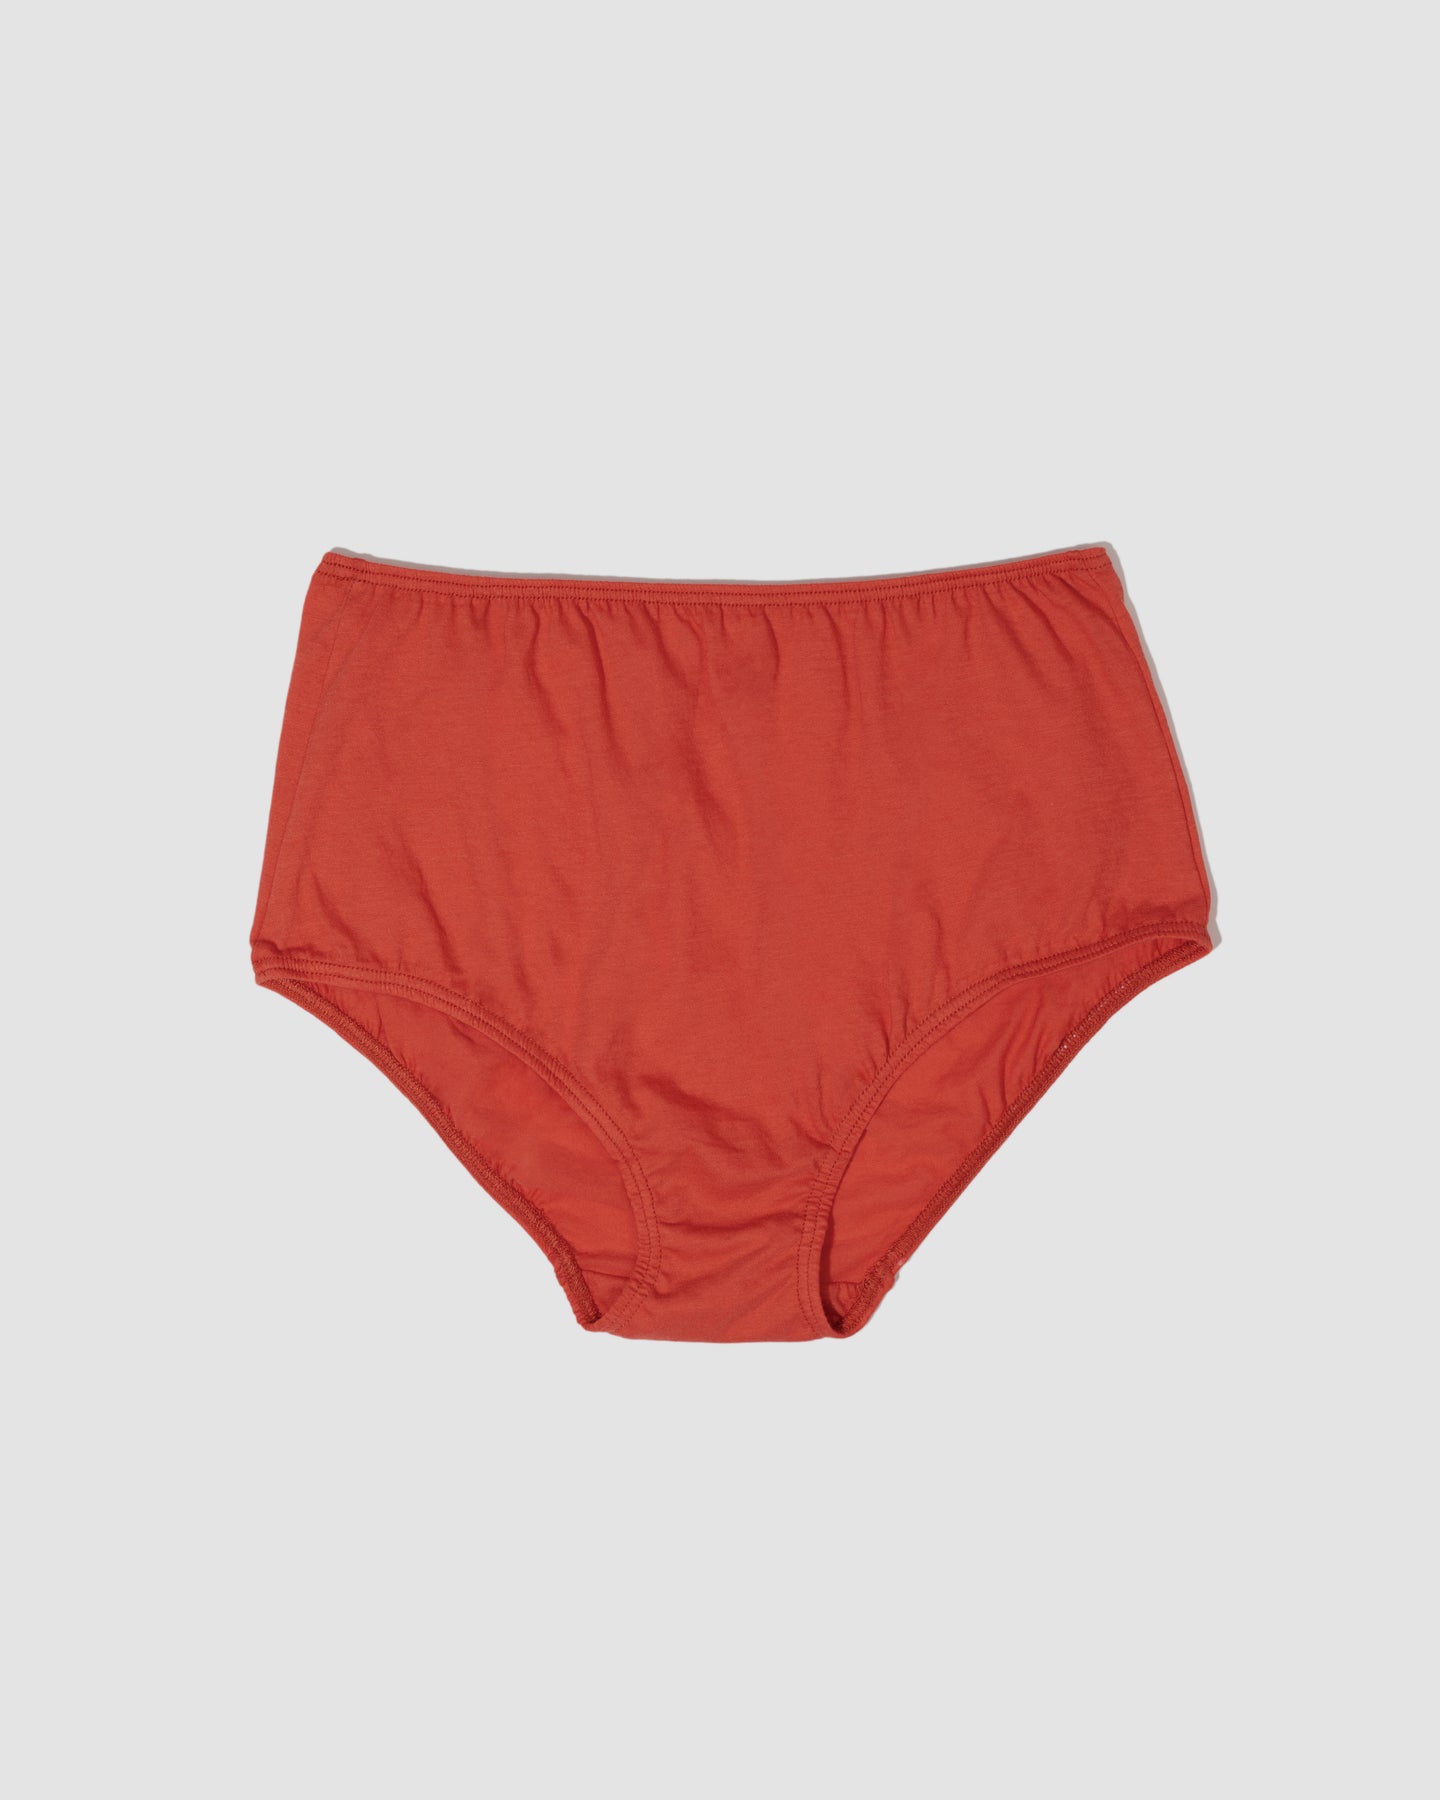 Health and Care :: 3 Pack 100% Organic Cotton Underwear